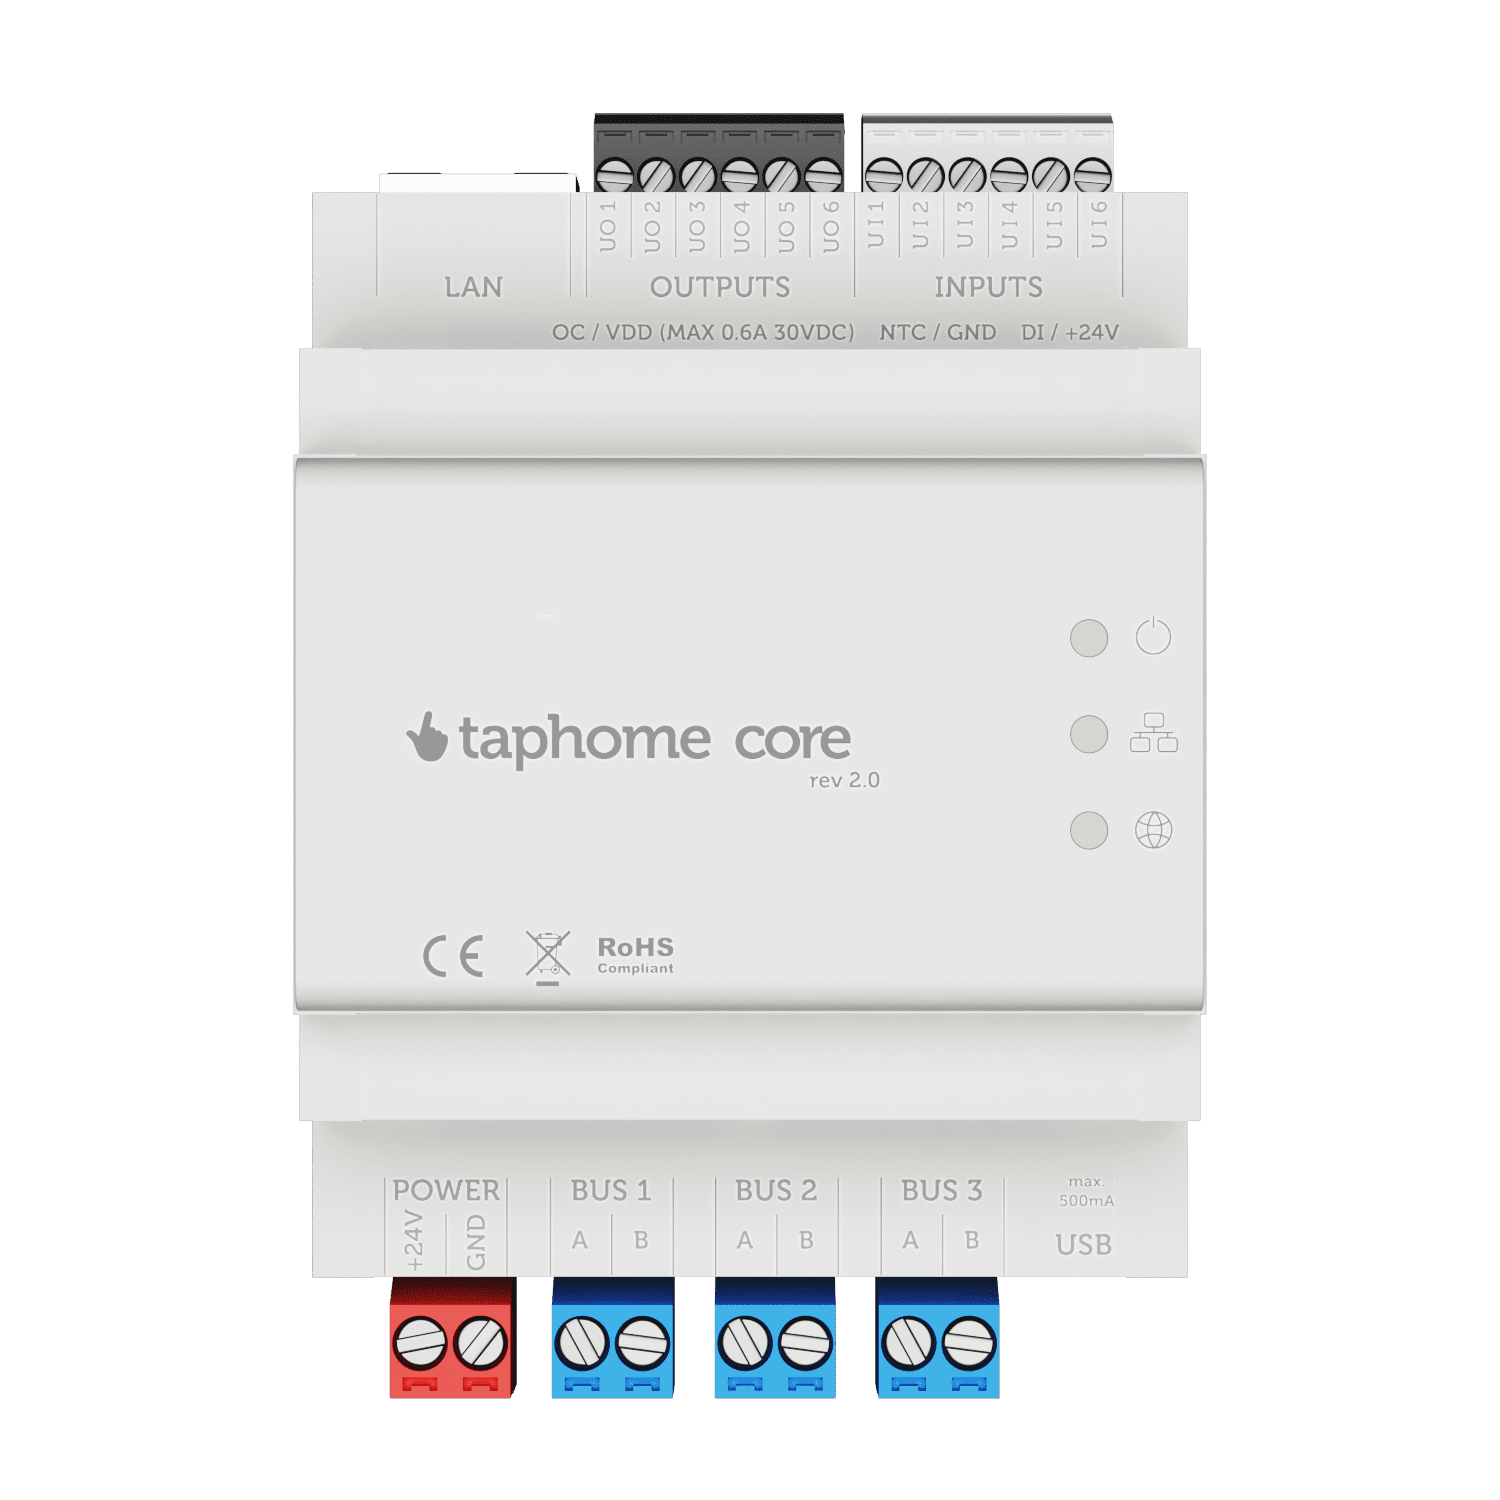 Taphome core